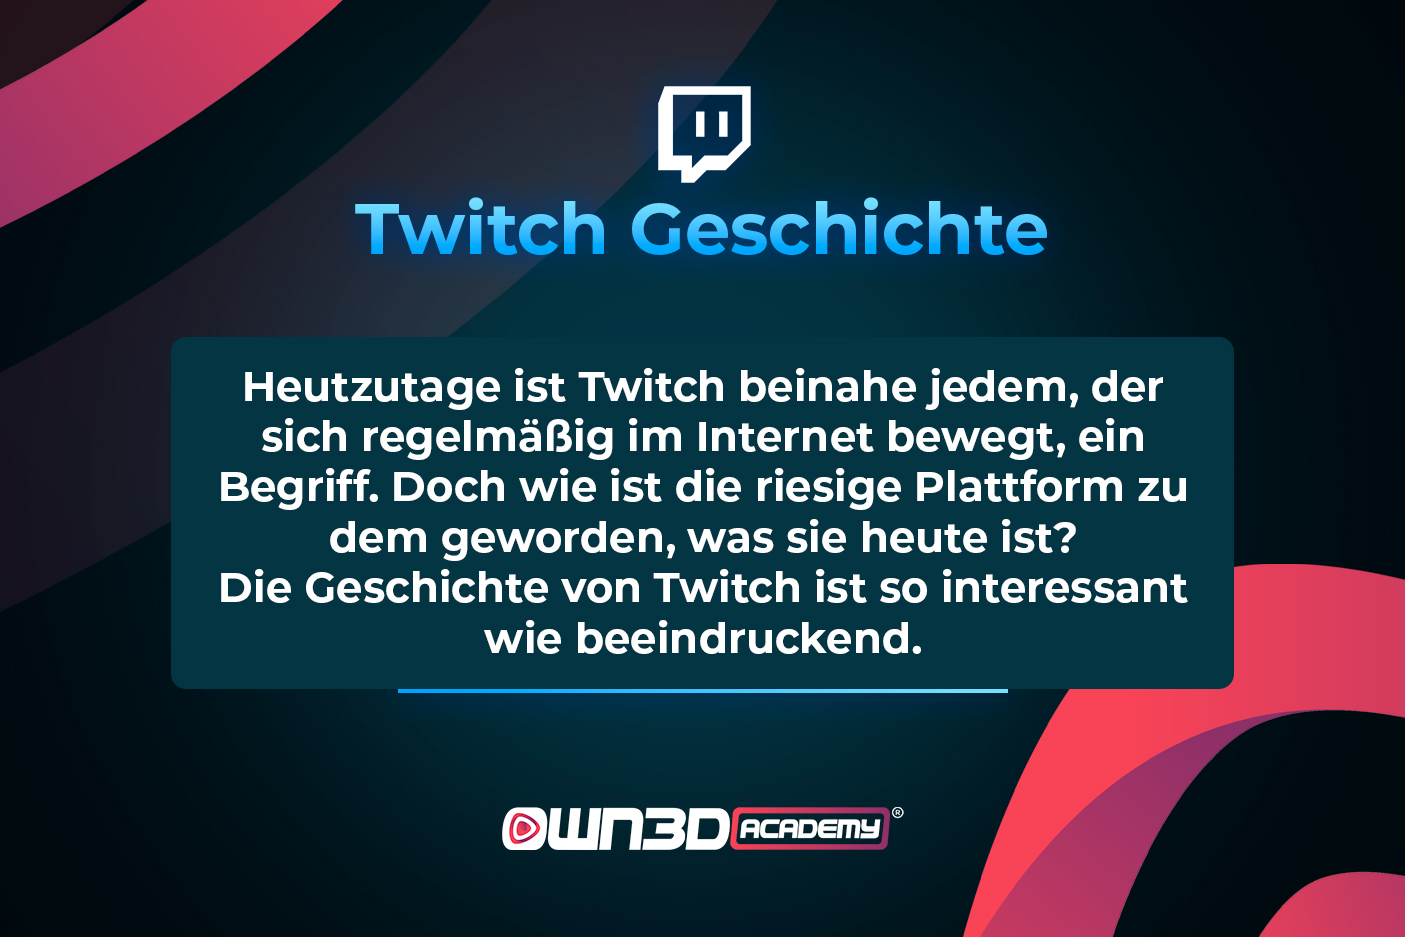 TWITCH_History-and-Keyfacts_GER_twitch-history.jpg